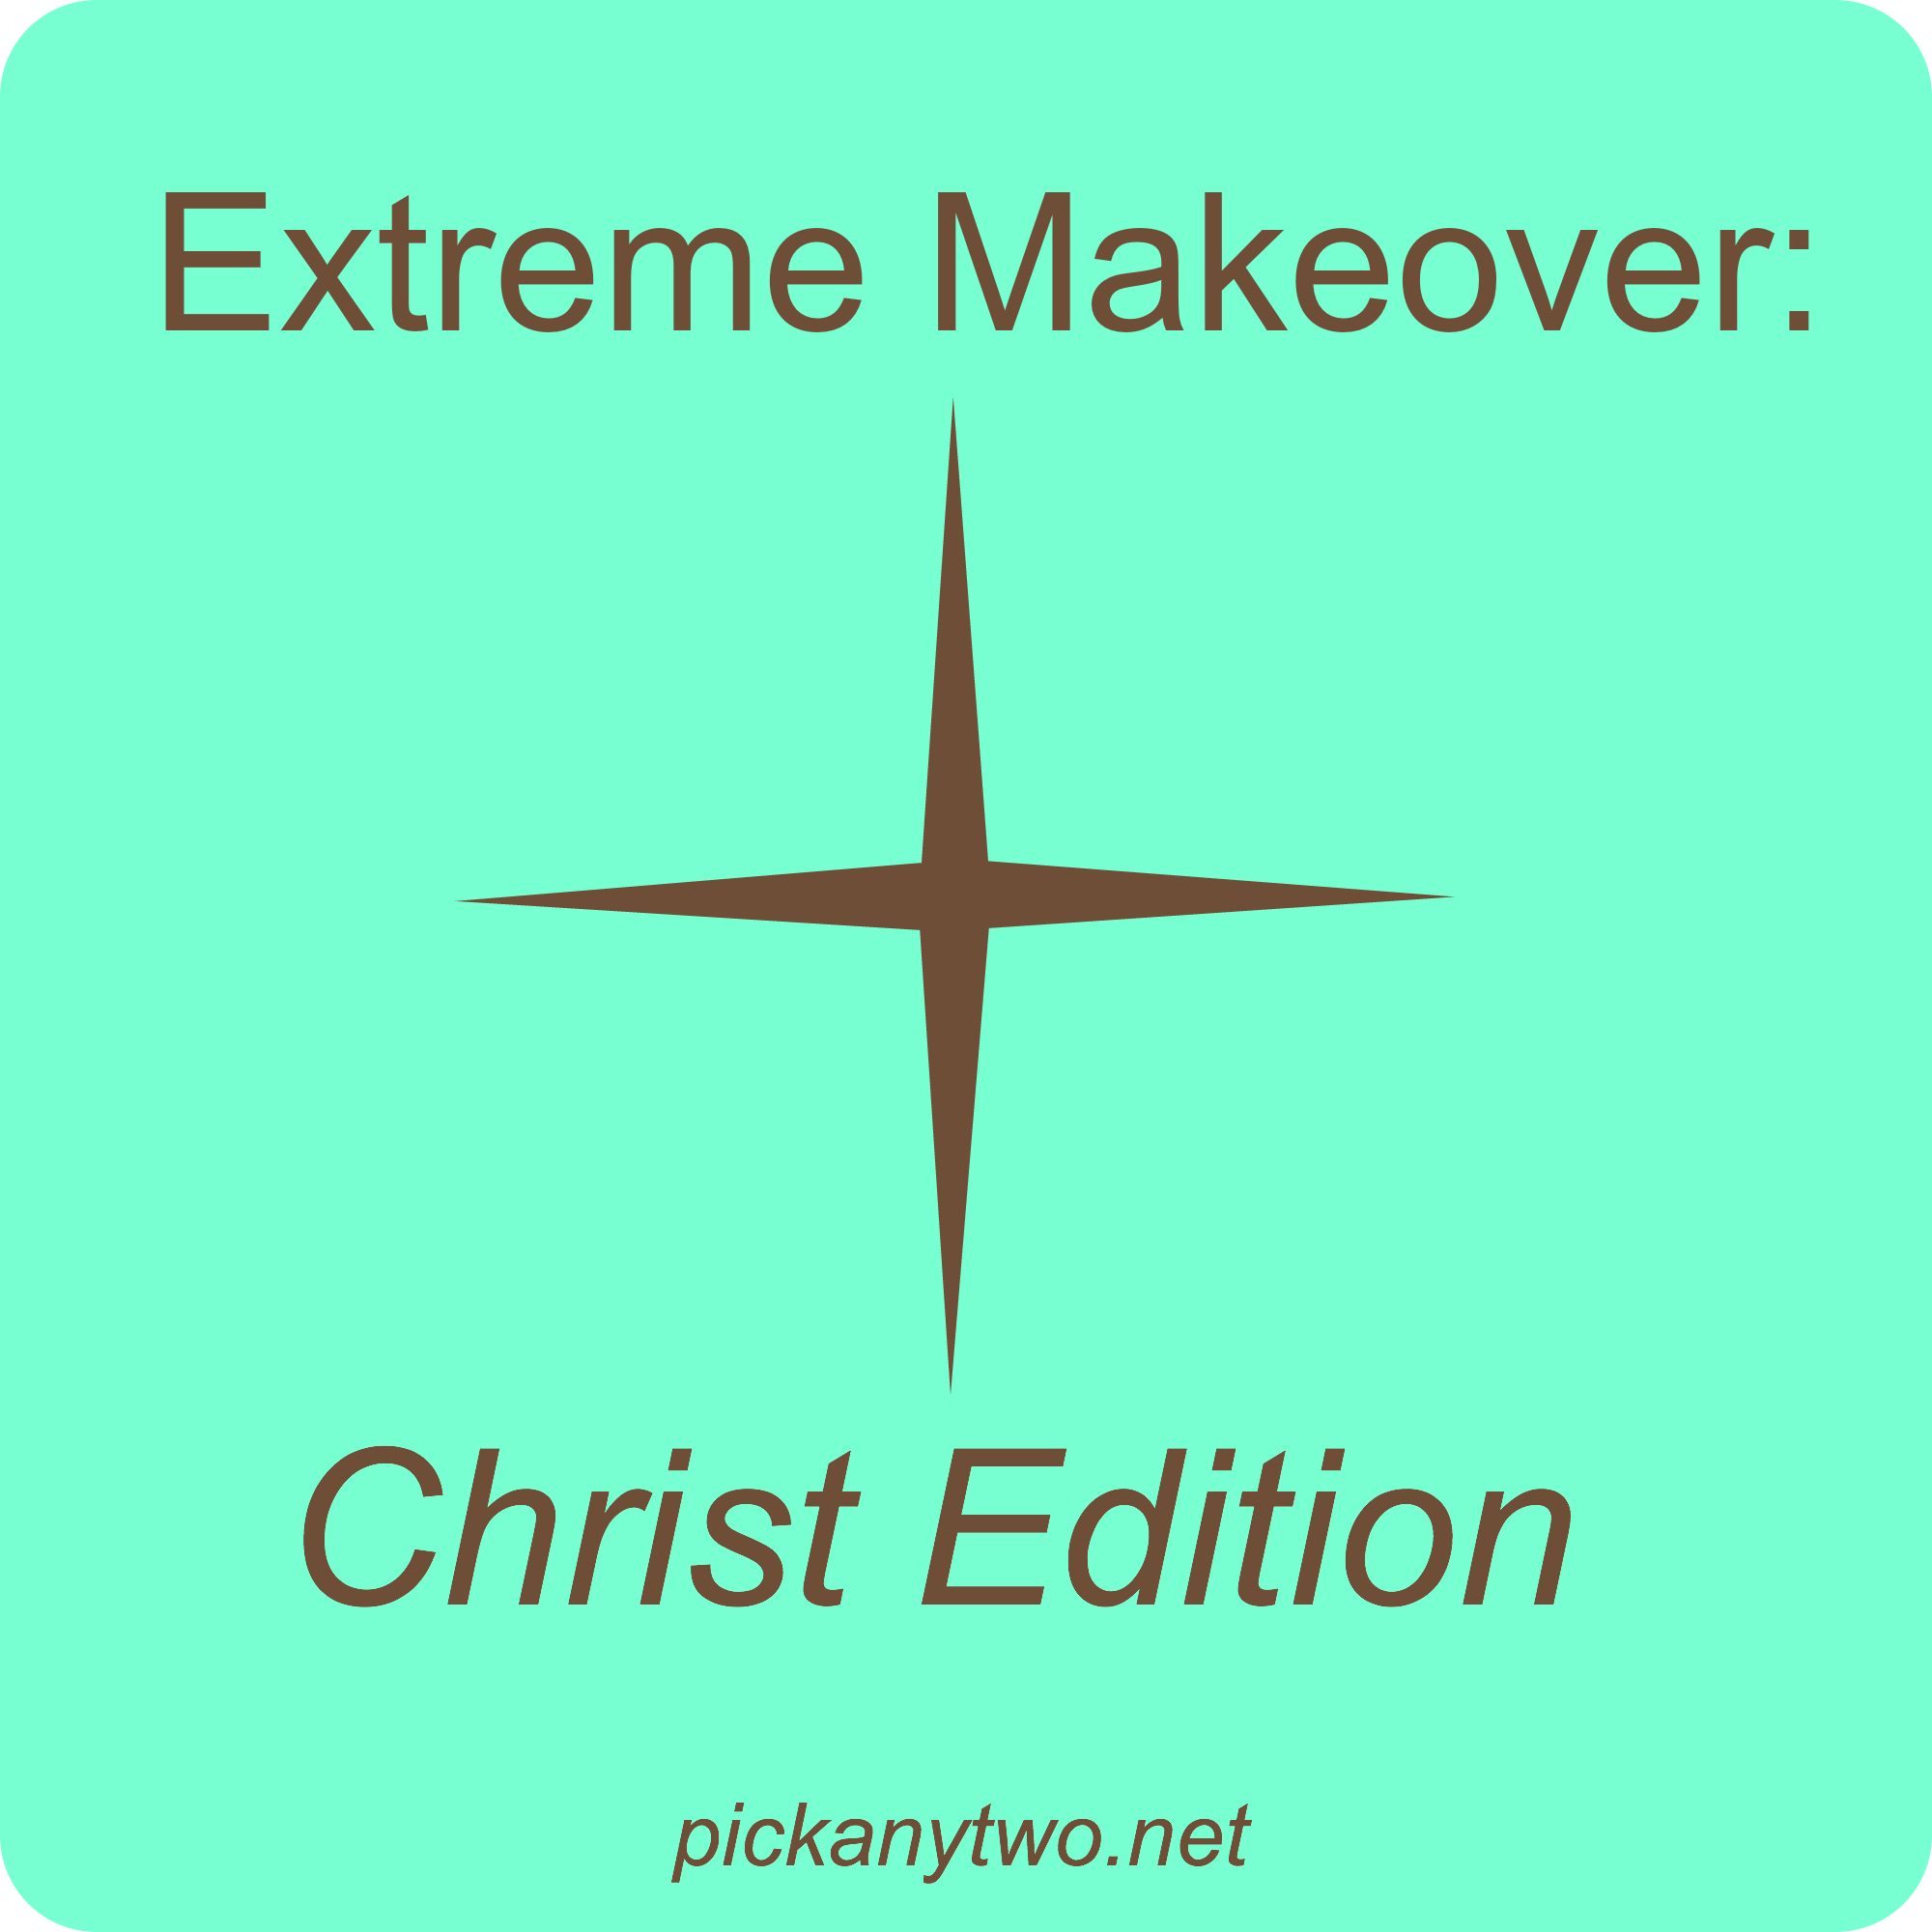 Extreme Makeover: Christ Edition